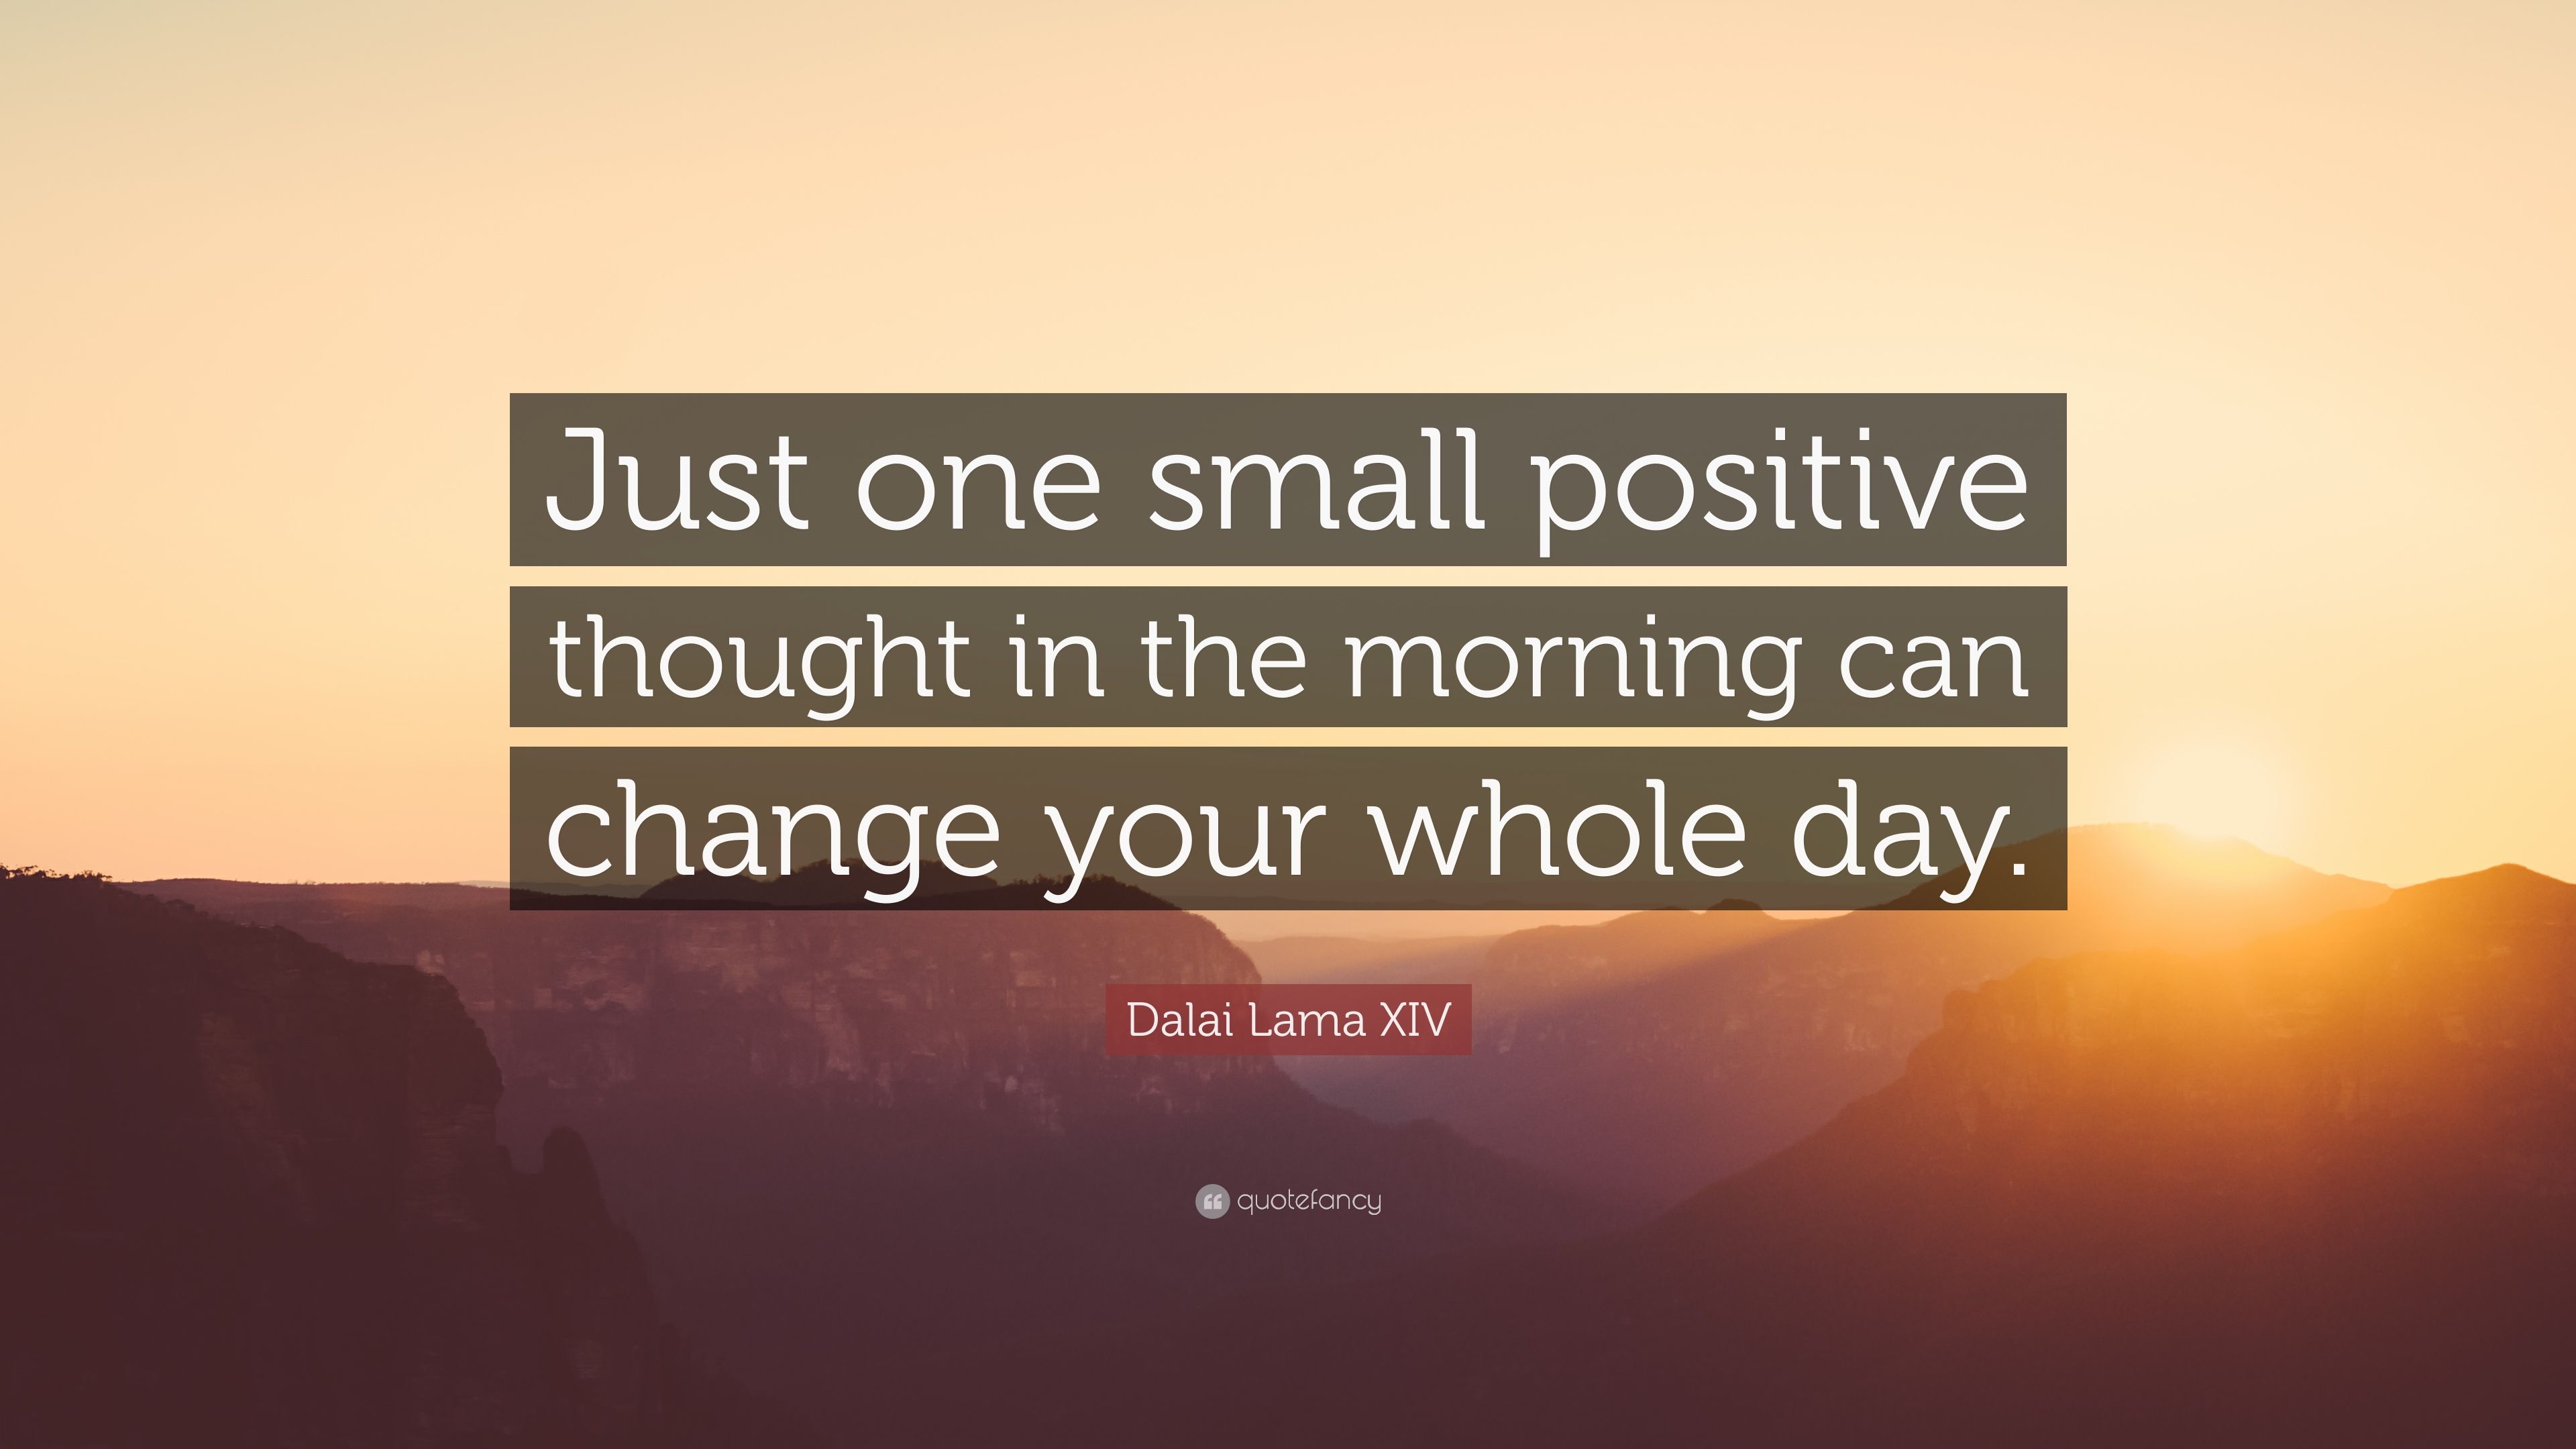 Dalai Lama XIV Quote: “Just one small positive thought in the morning can change your whole day.” (12 wallpaper)